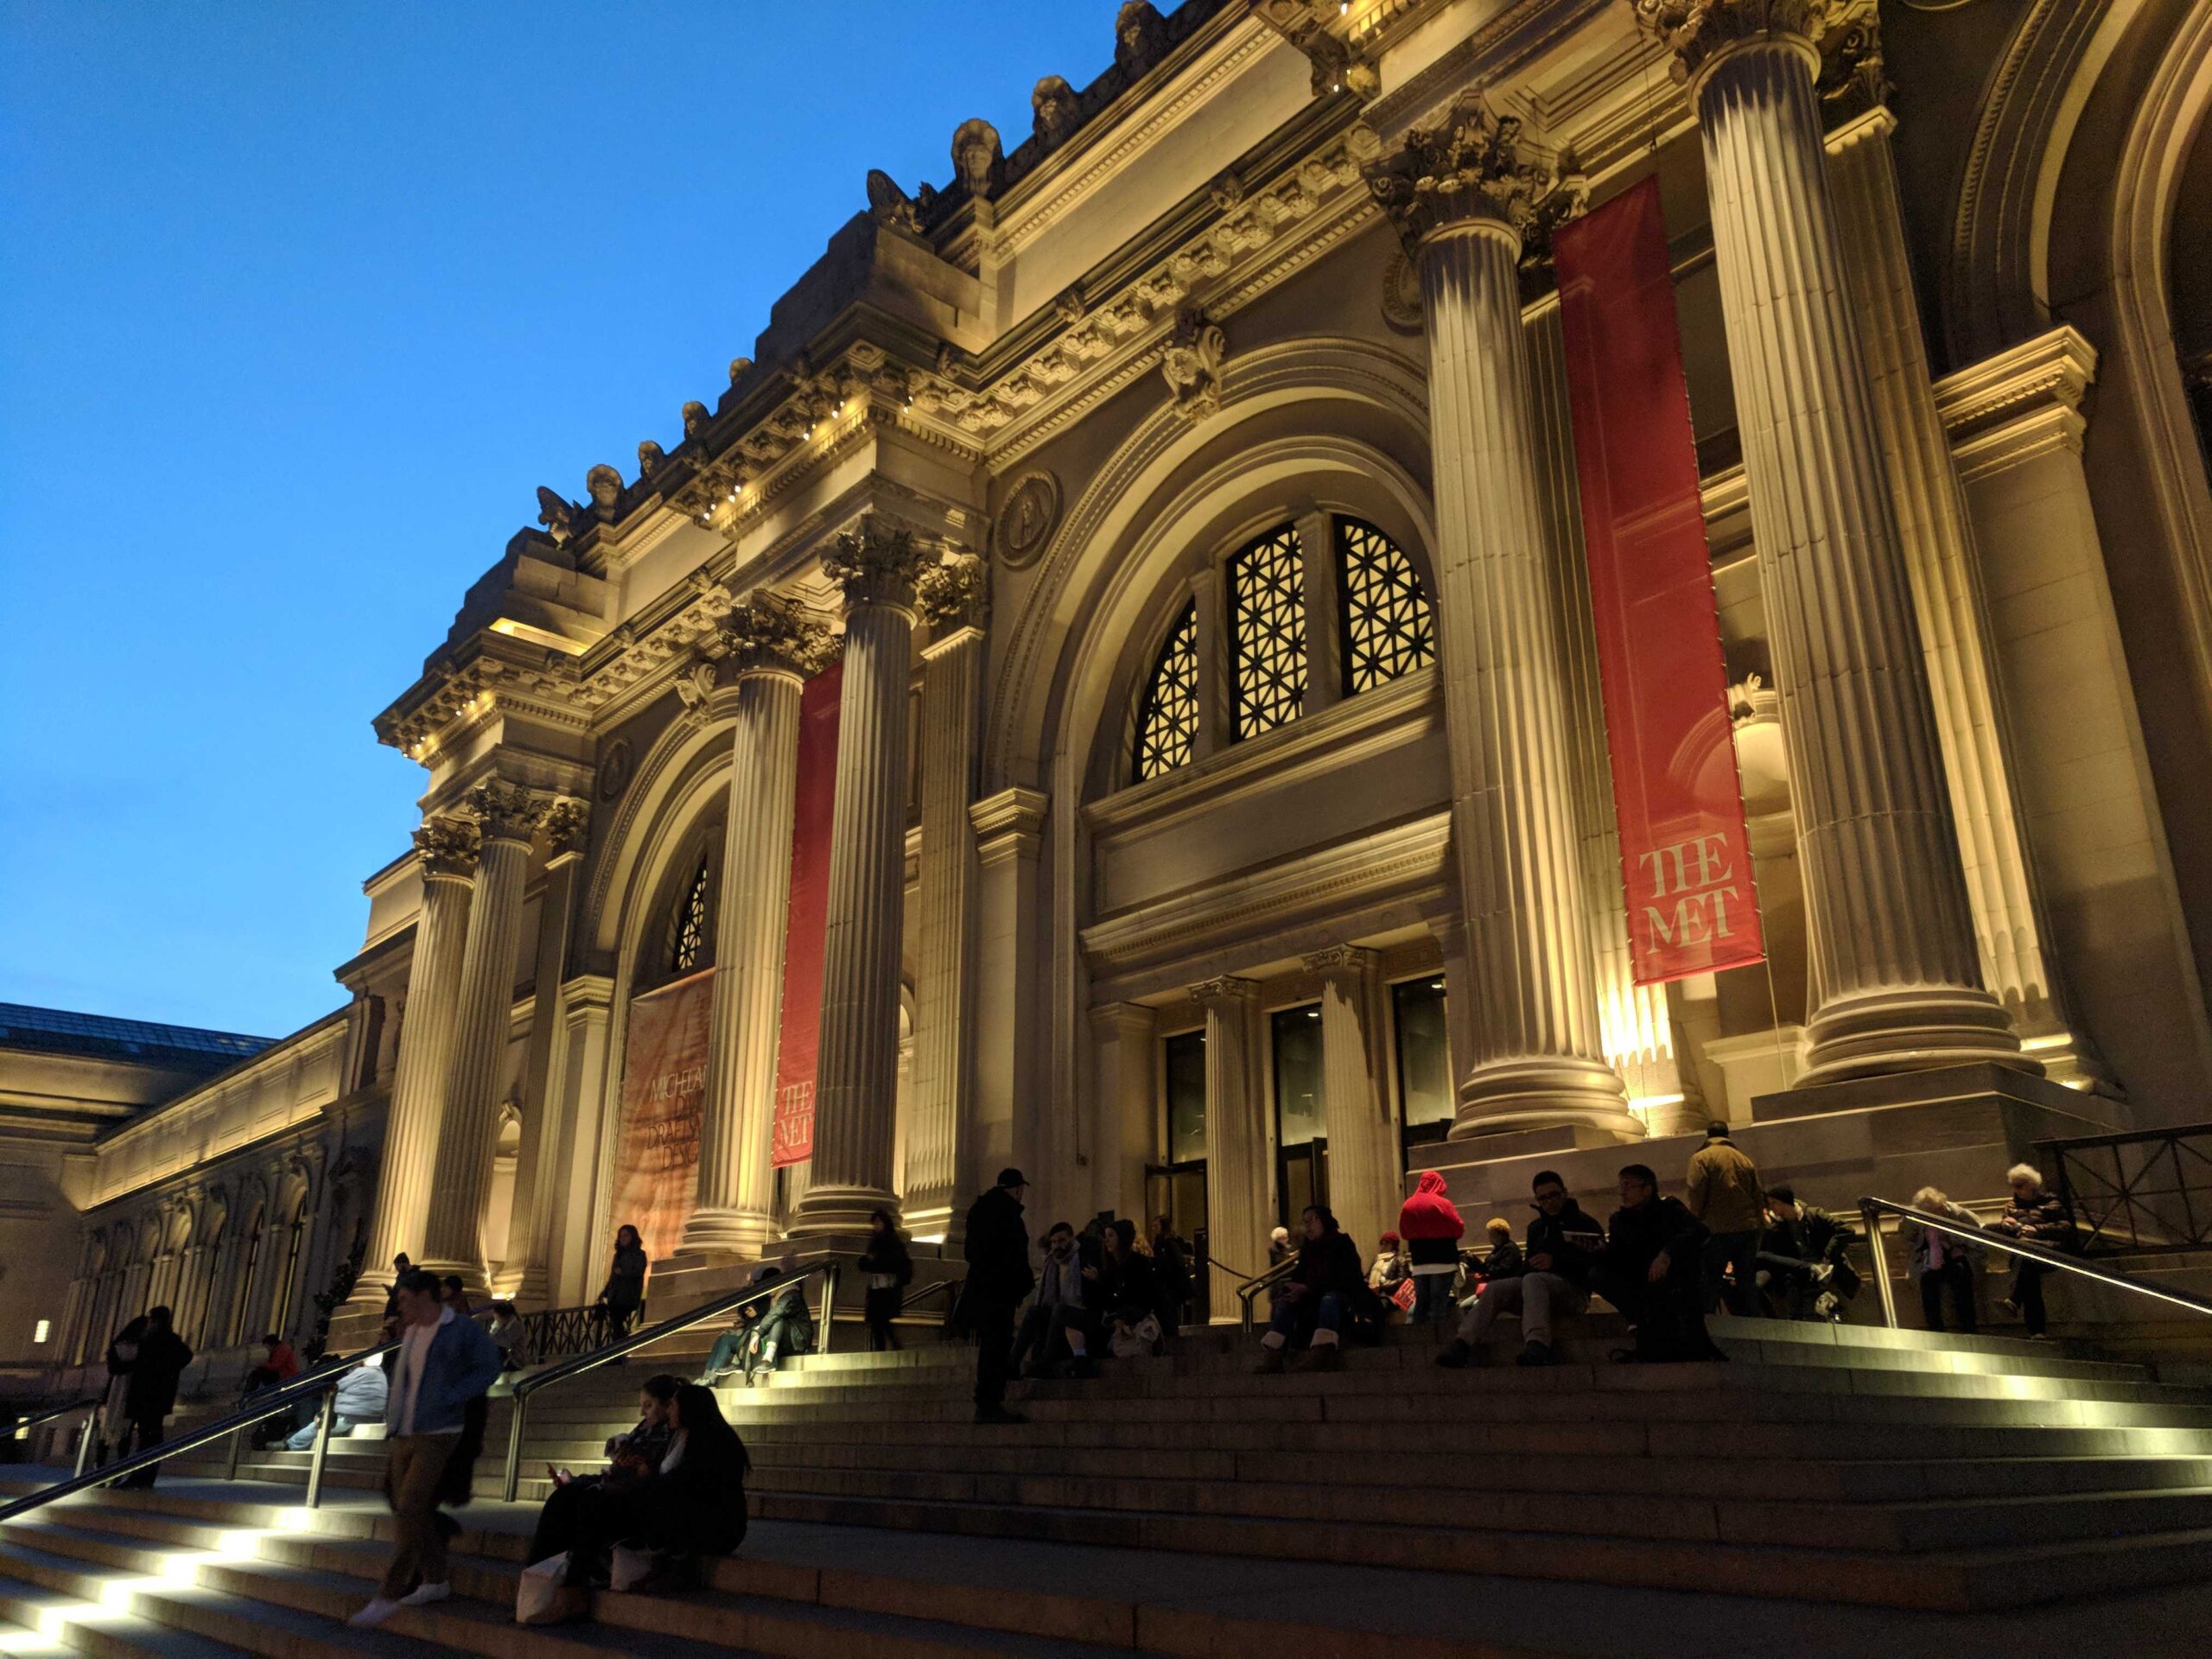 The Metropolitan Museum of Art steps at dusk. Photo by Ying Cao